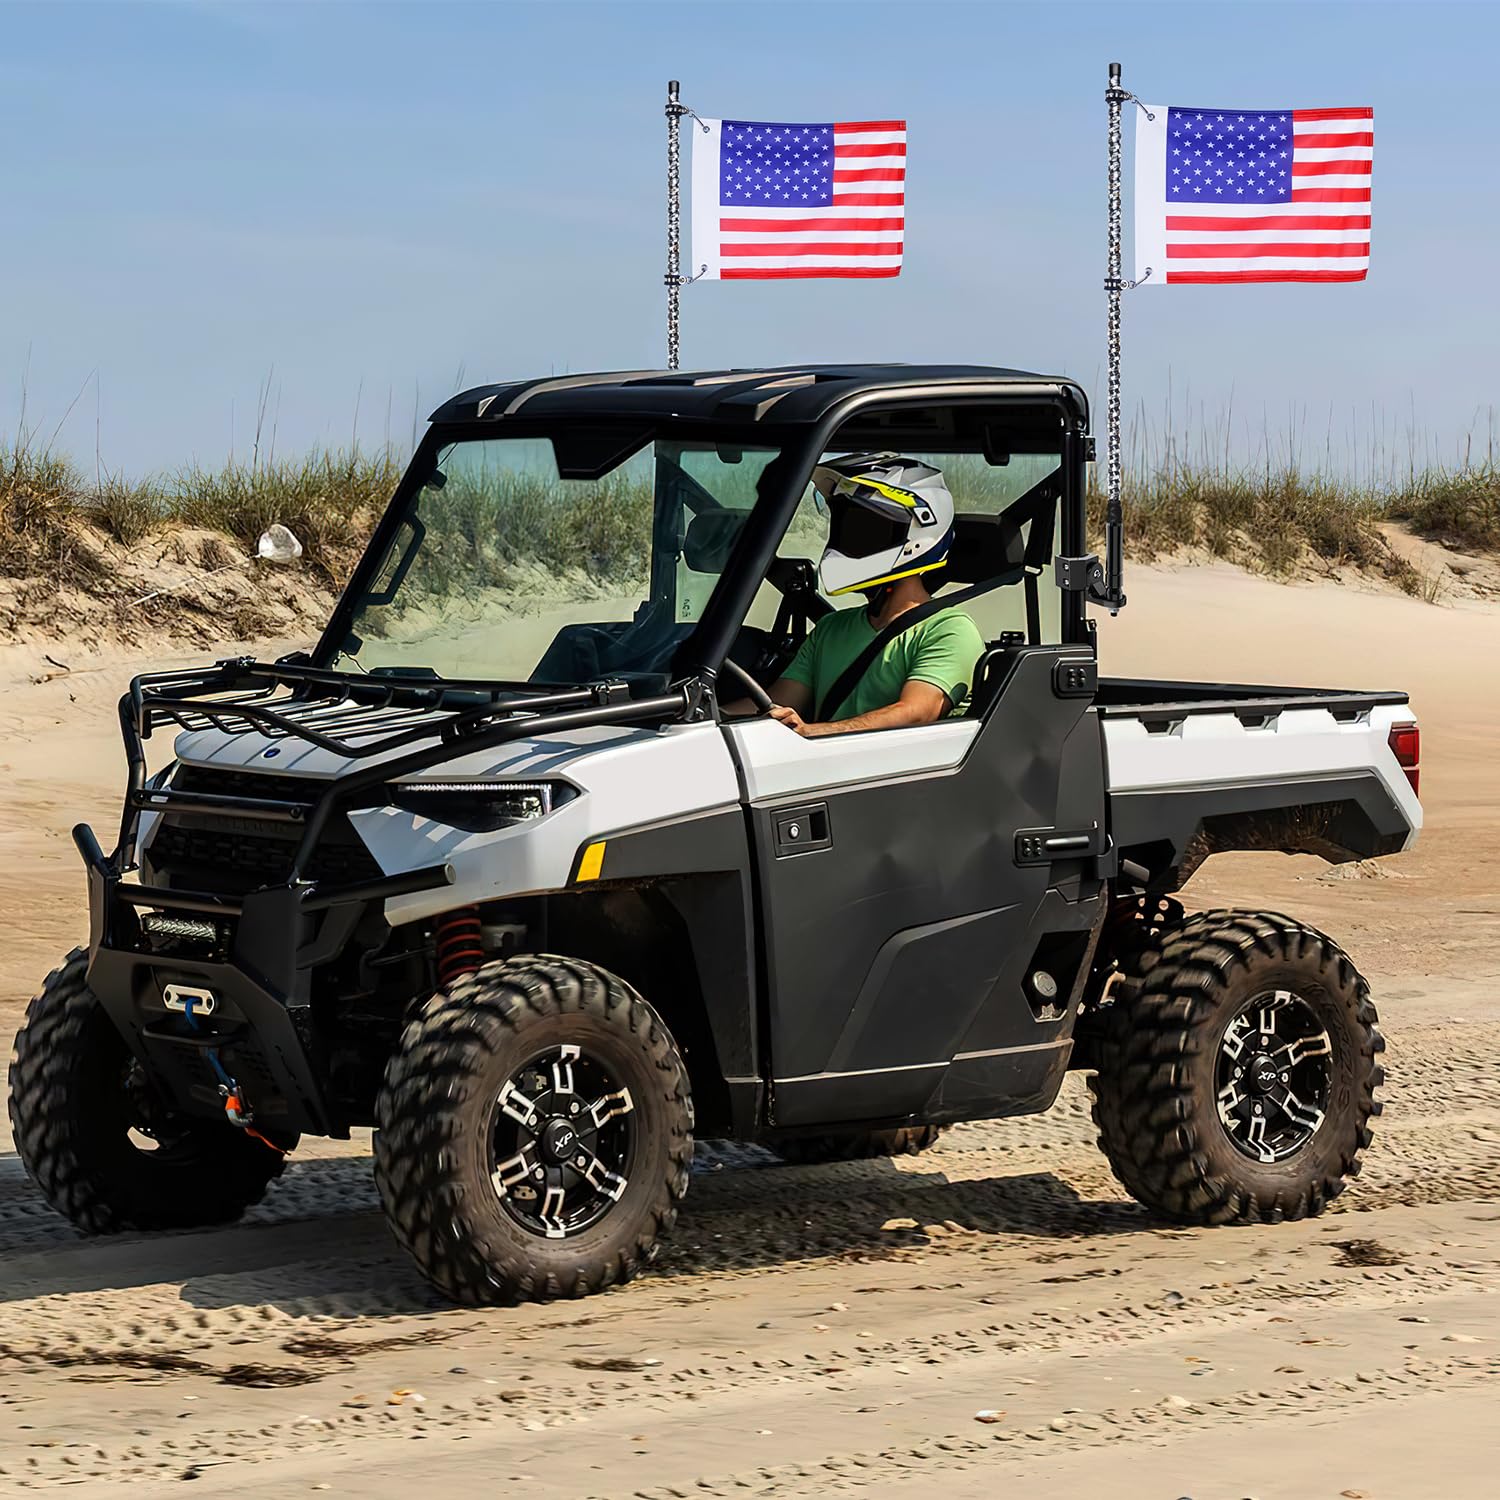 Nilight UTV Whip Light Mount 2PCS Flag Antenna Mounting Brackets Adjustable for Pro-fit Cage Compatible with Polaris Ranger General Can am Defender Commander Maverick Trail/Sport, 2 Years Warranty